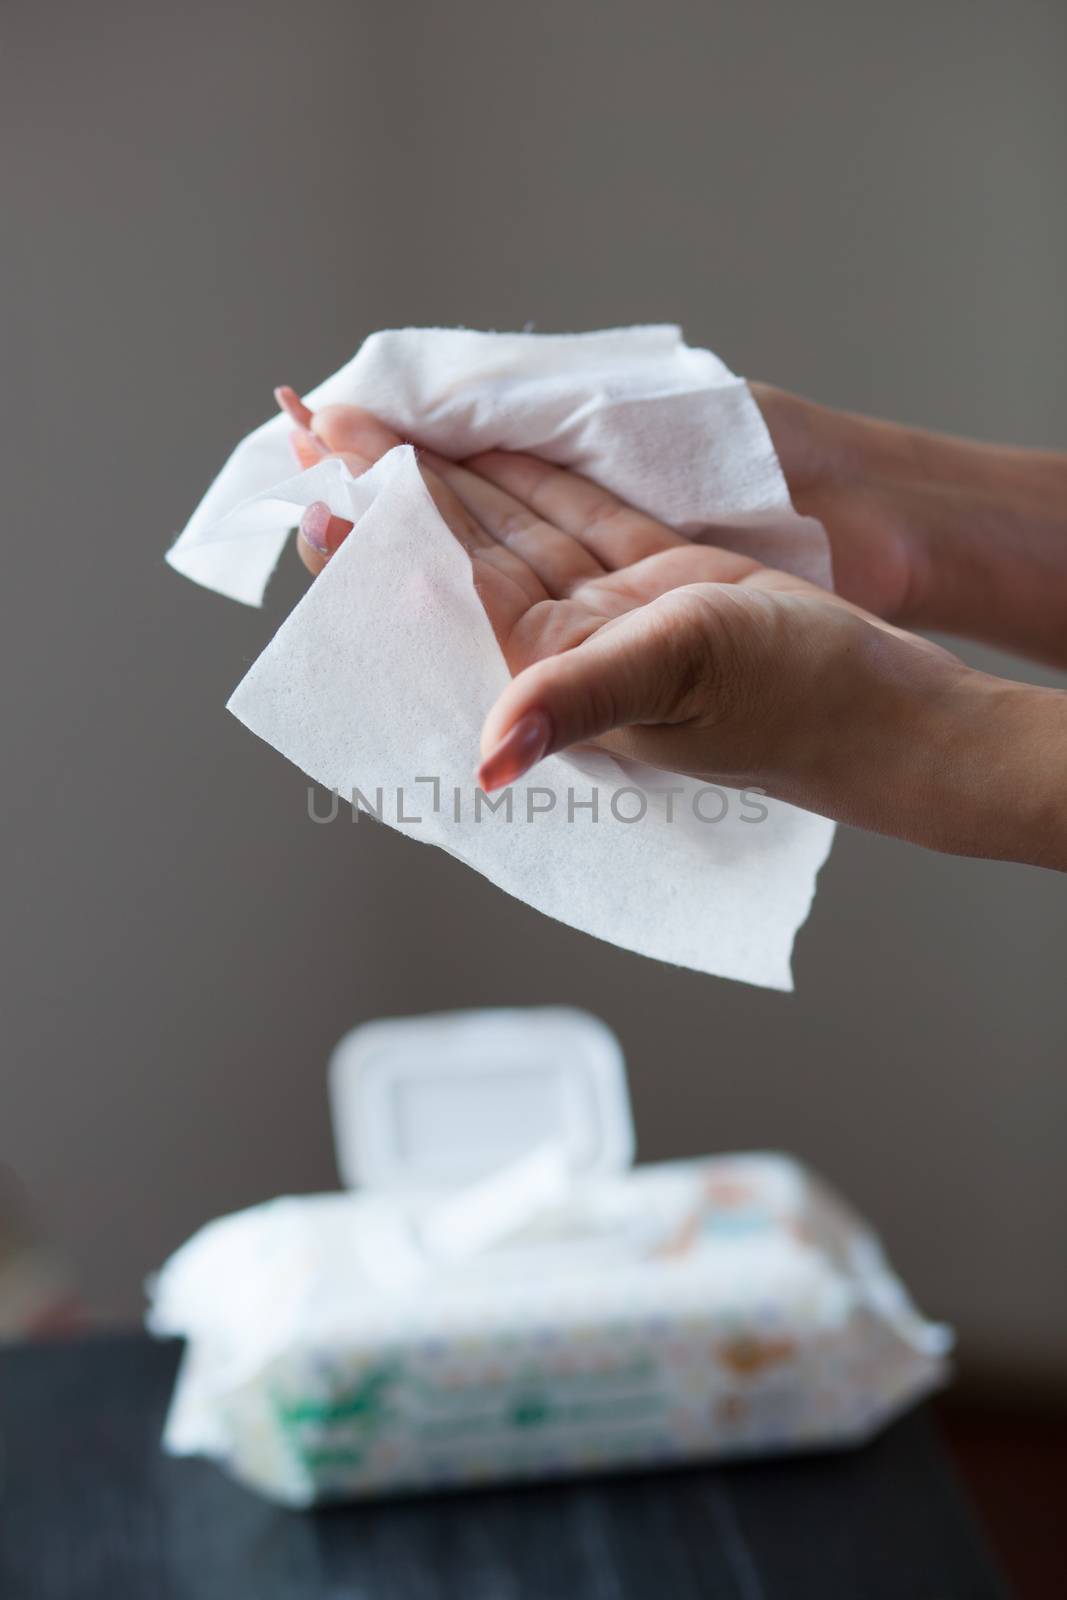 Woman clean hands with wet wipes, blurred package in background